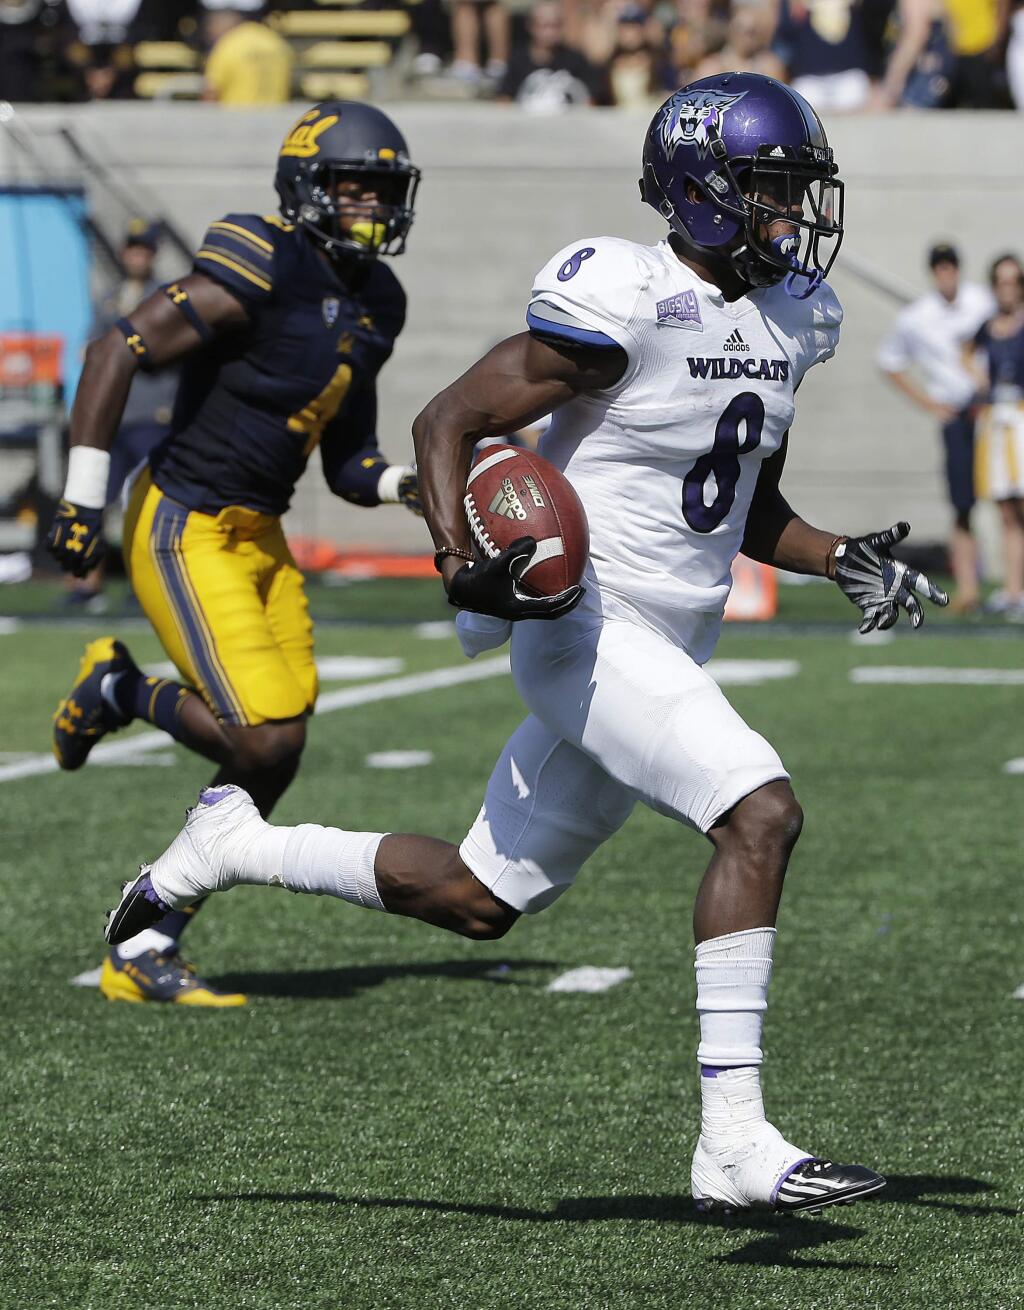 Weber State wide receiver Rashid Shaheed (8) runs past Cal linebacker Derron Brown (4) to score on a touchdown reception during in Berkeley, Saturday, Sept. 9, 2017. (AP Photo/Jeff Chiu)